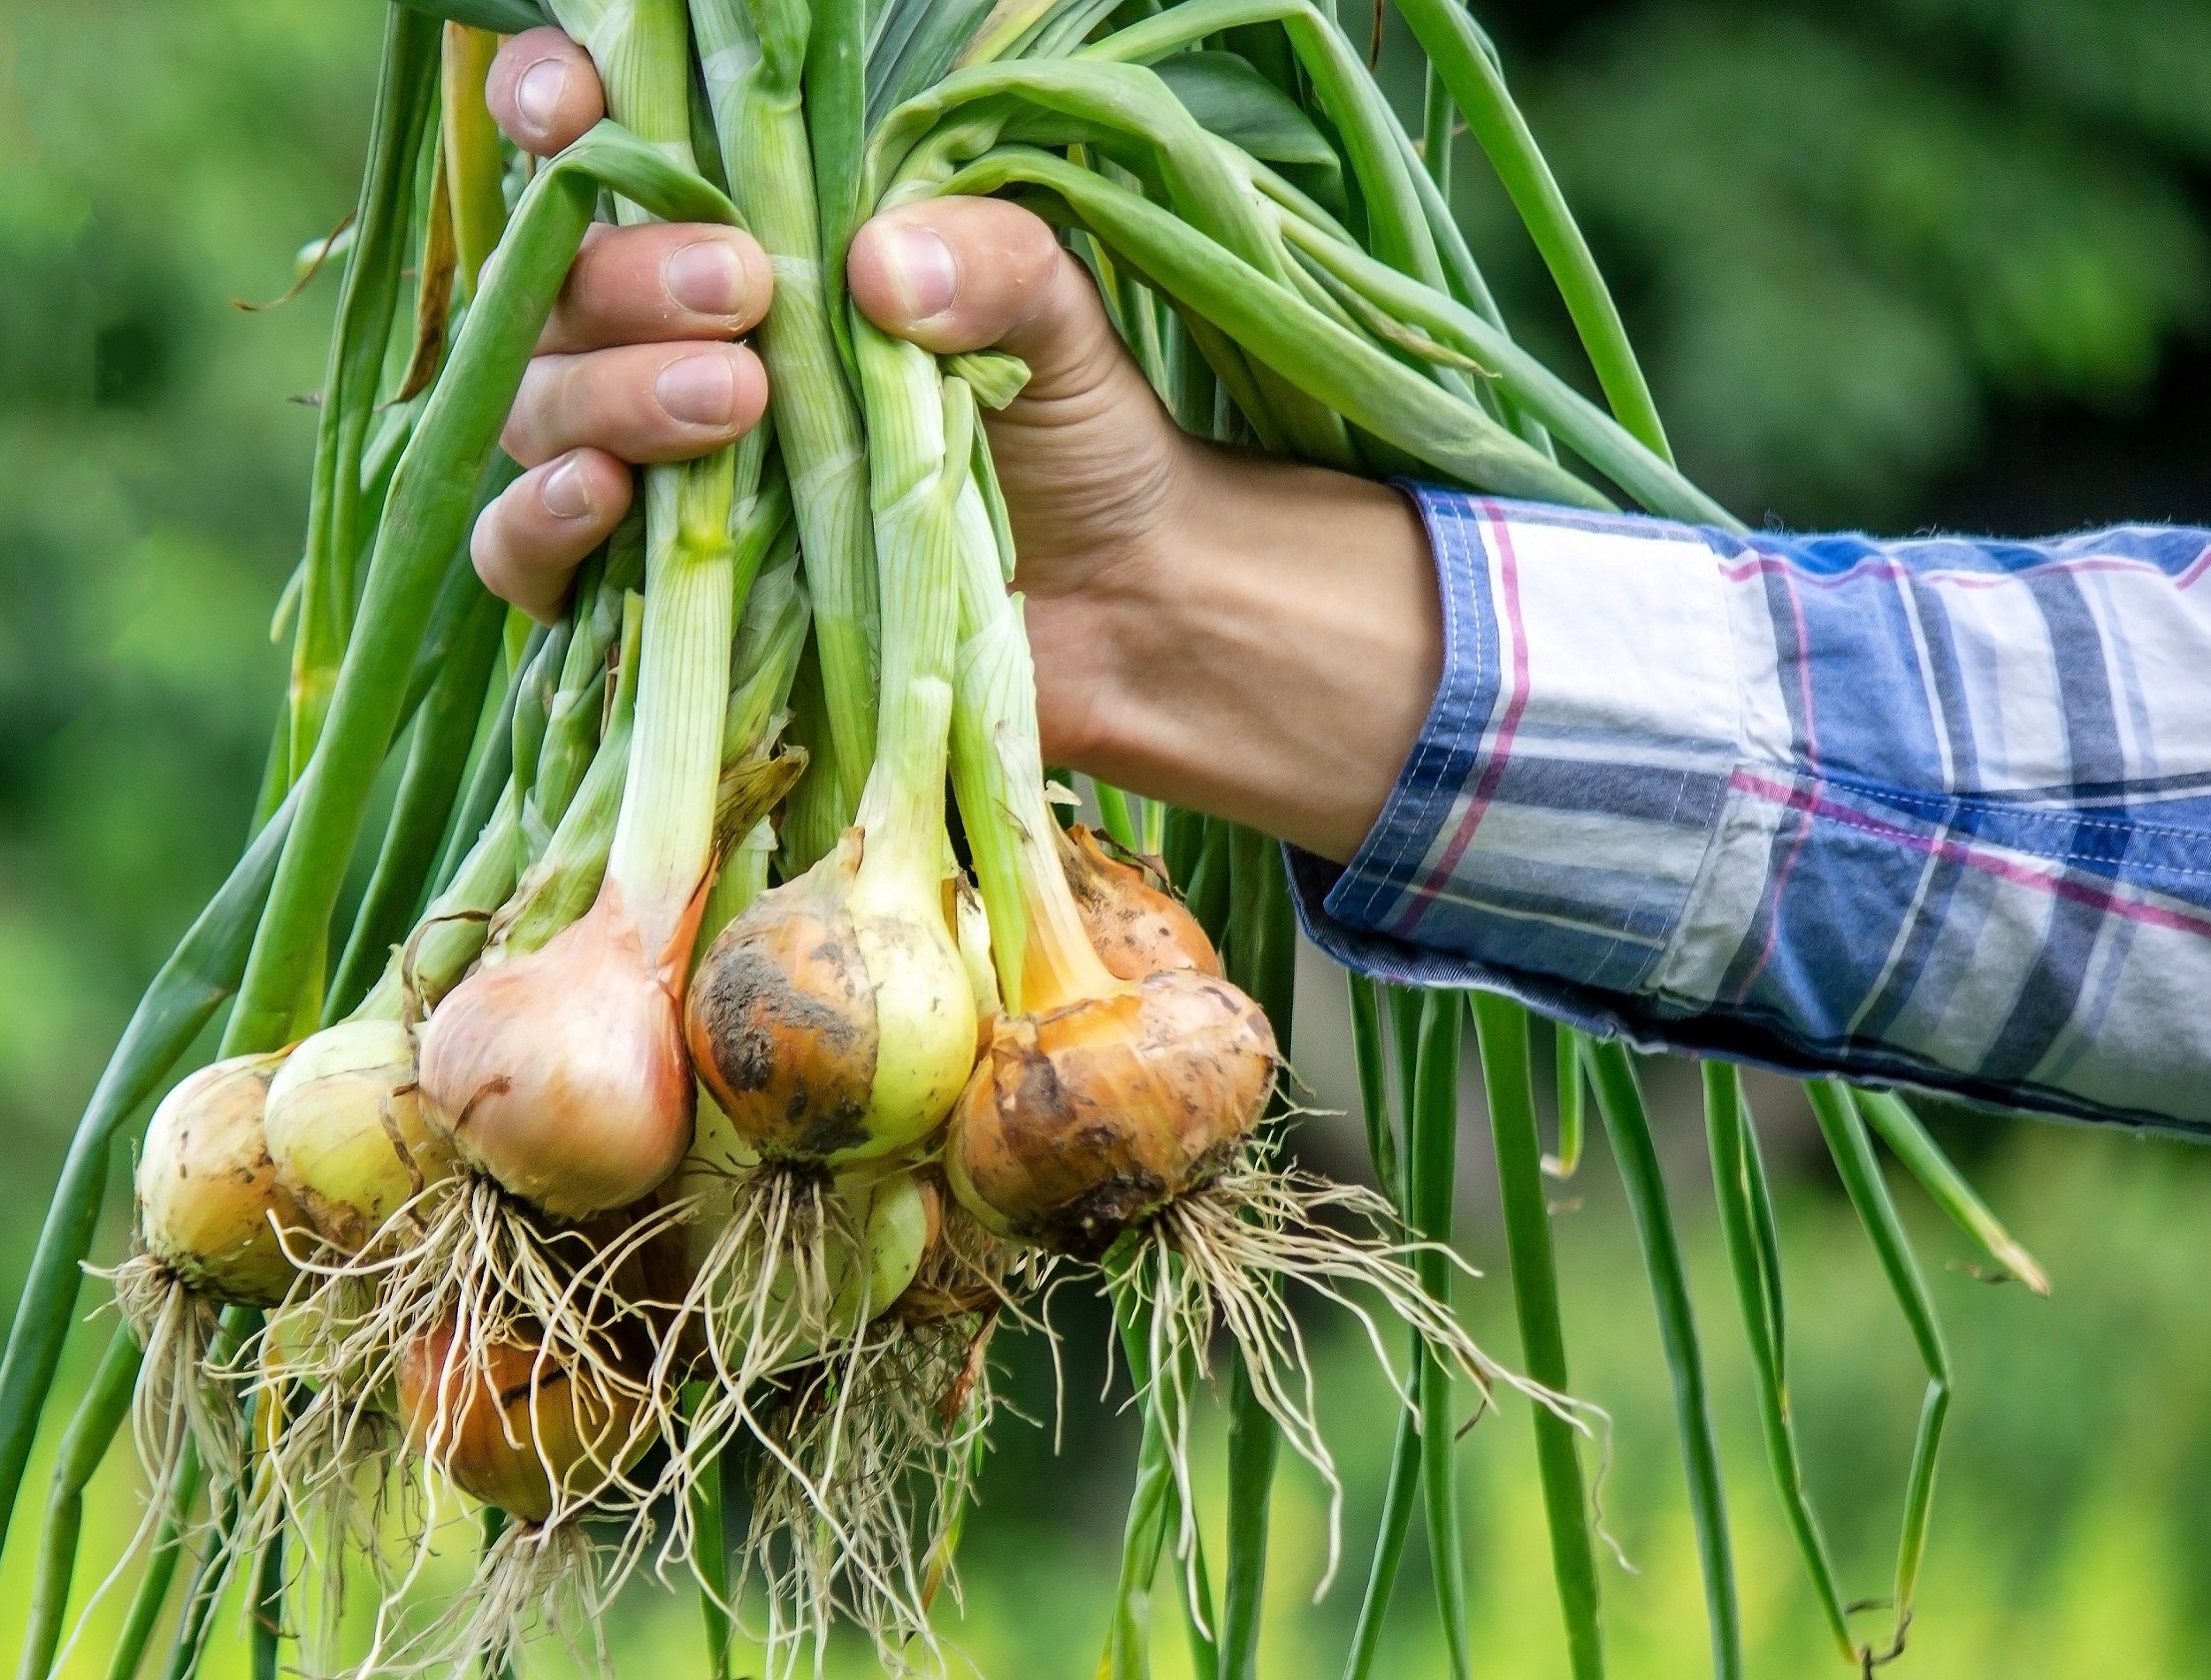 Person holding freshly harvested onions with large bulbs